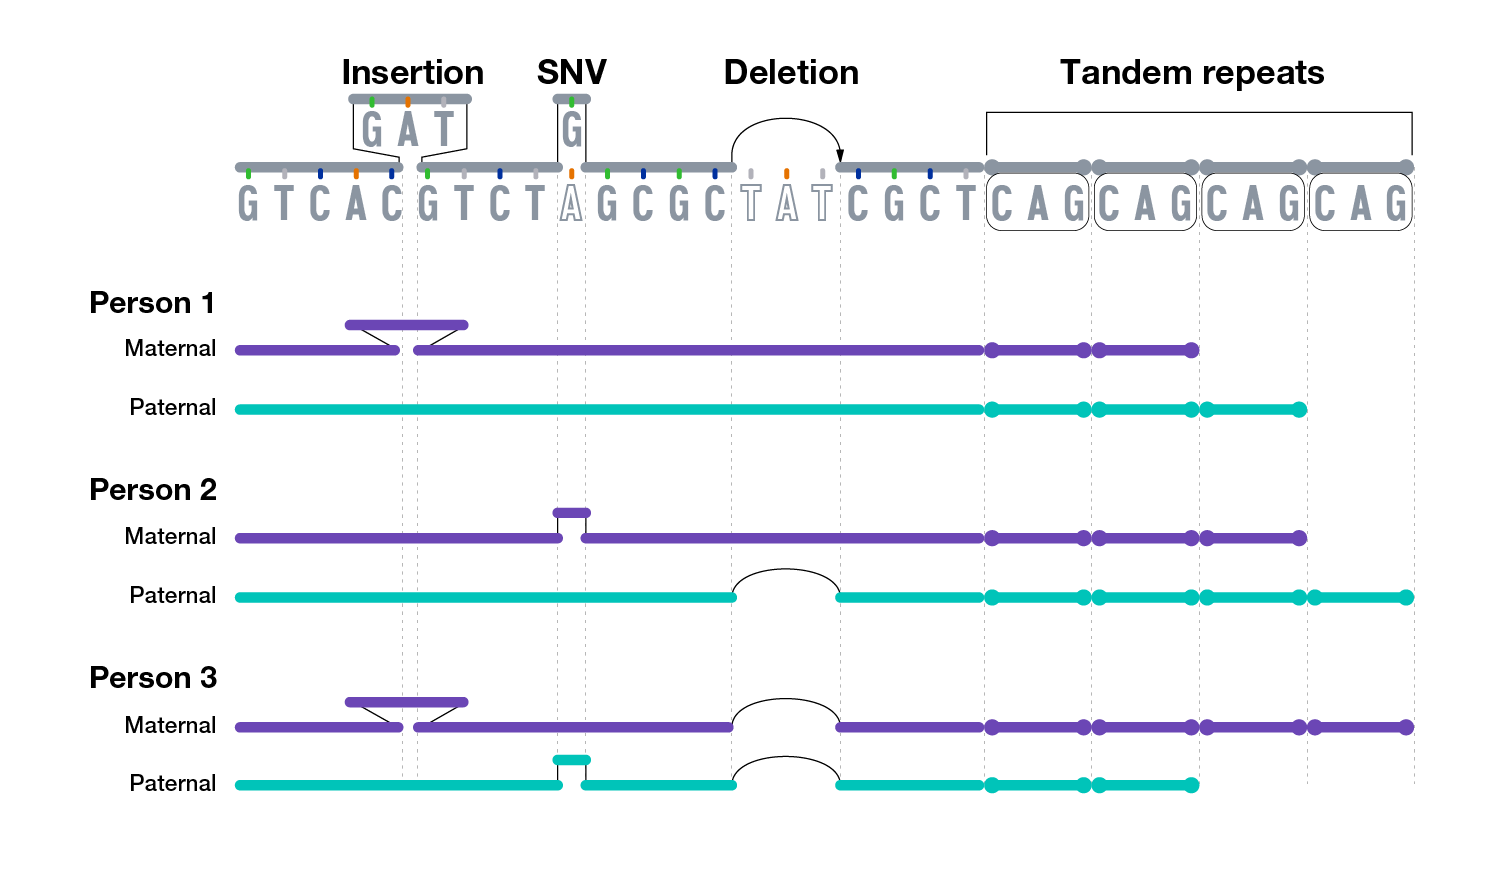 graphic showing tandem repeats